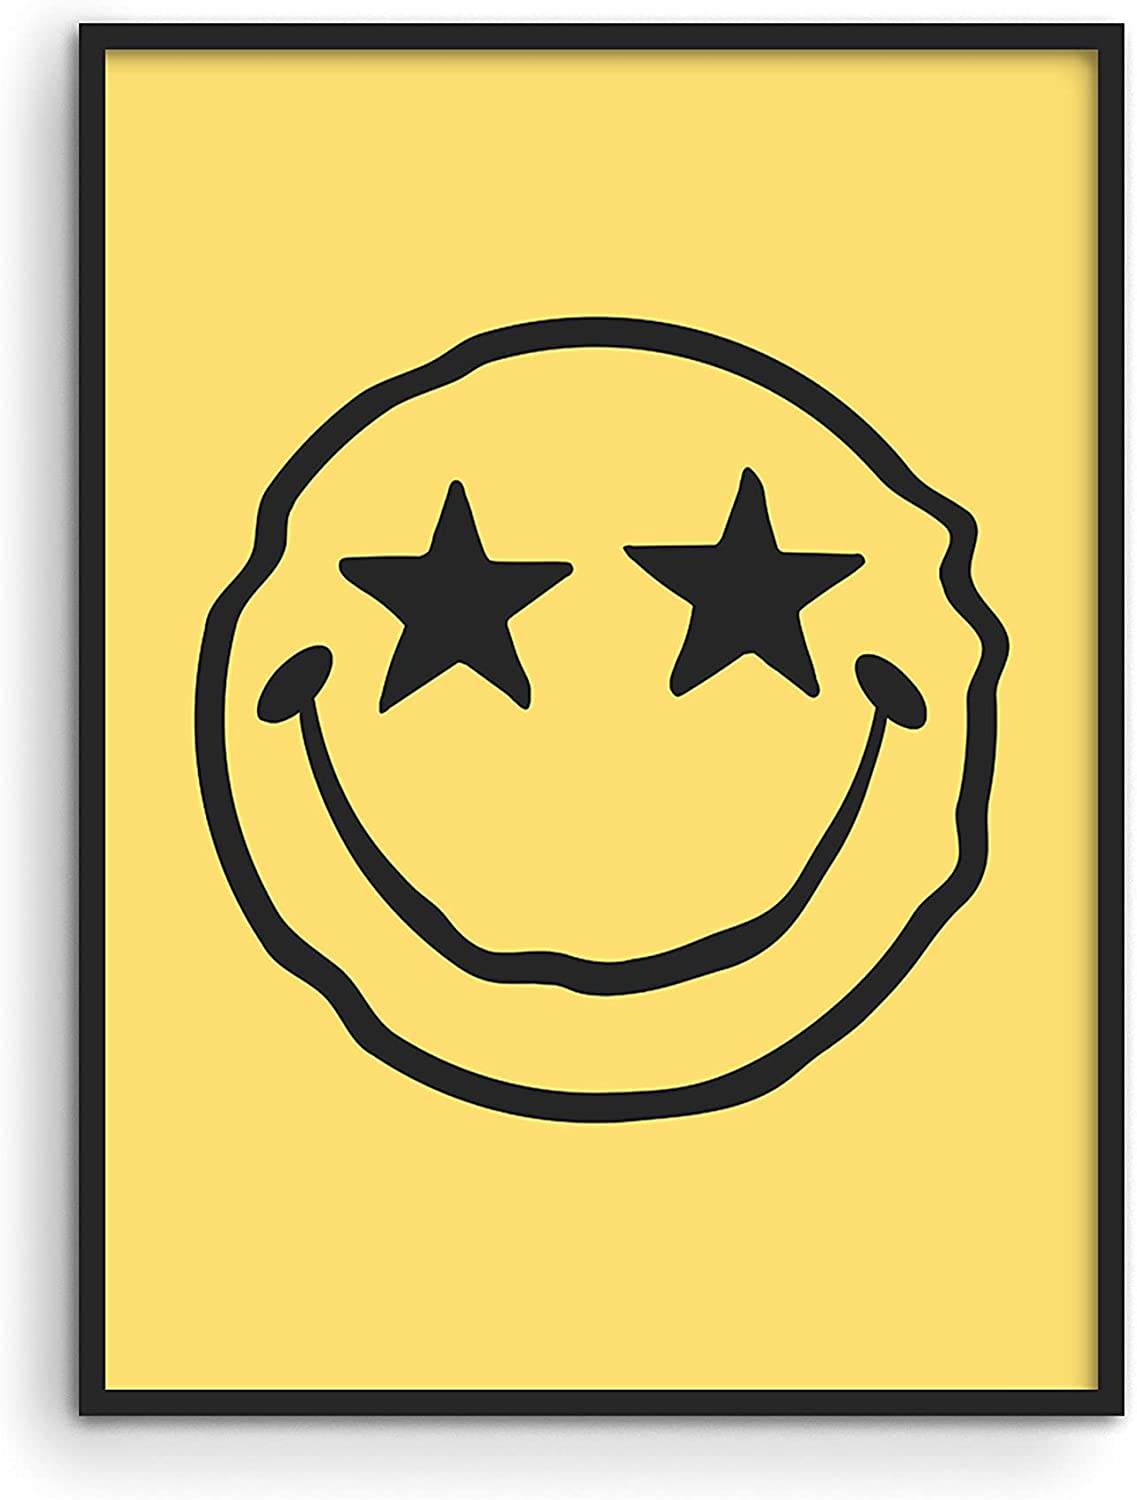 Melting Smiley Face Posters for Sale  Redbubble